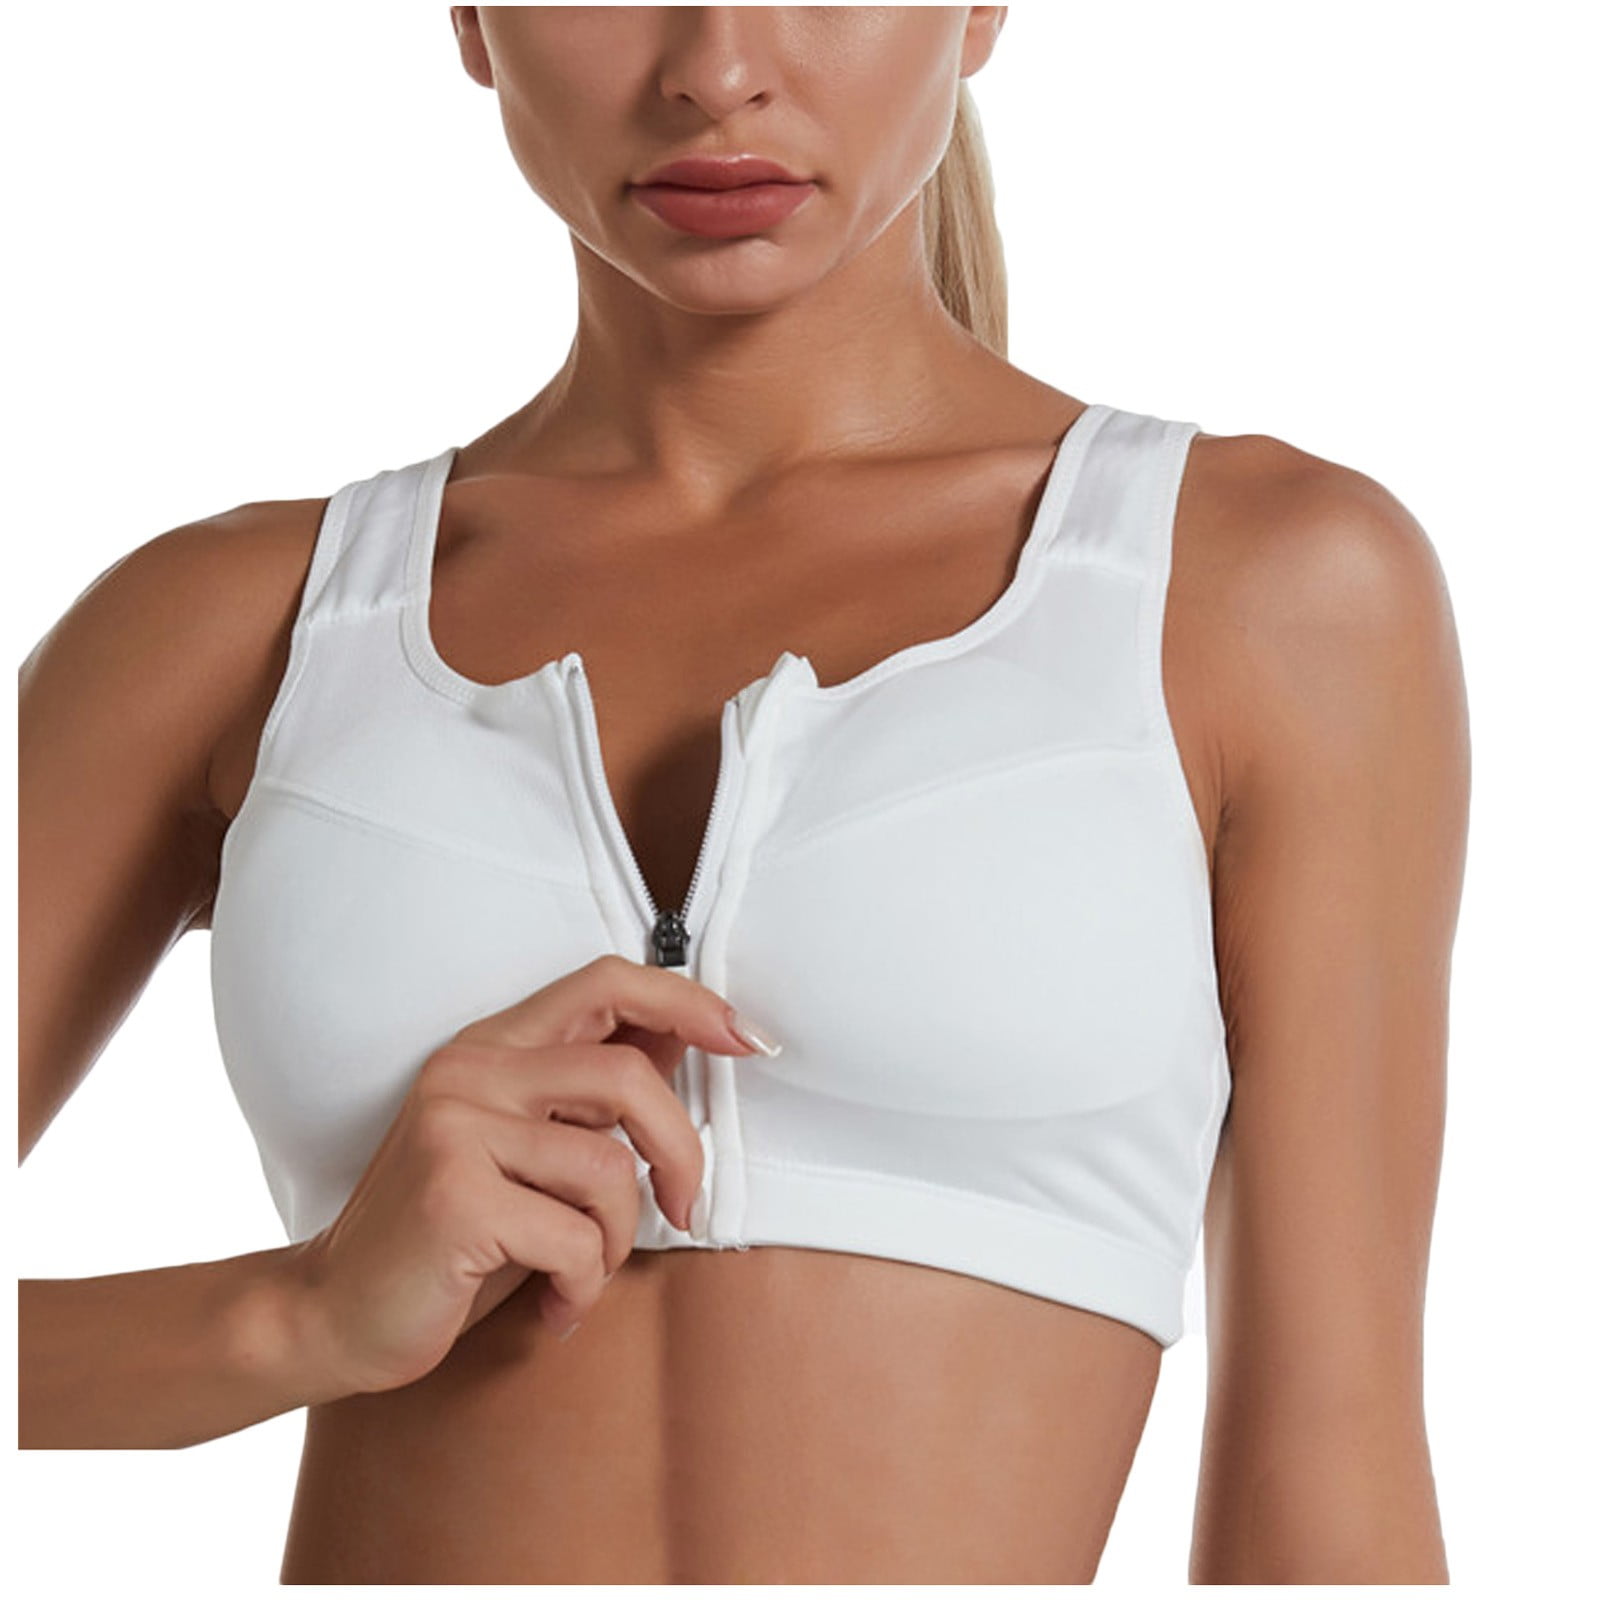 Zuwimk Sports Bras For Women,Lightly Latex Lined Cup Wirefree